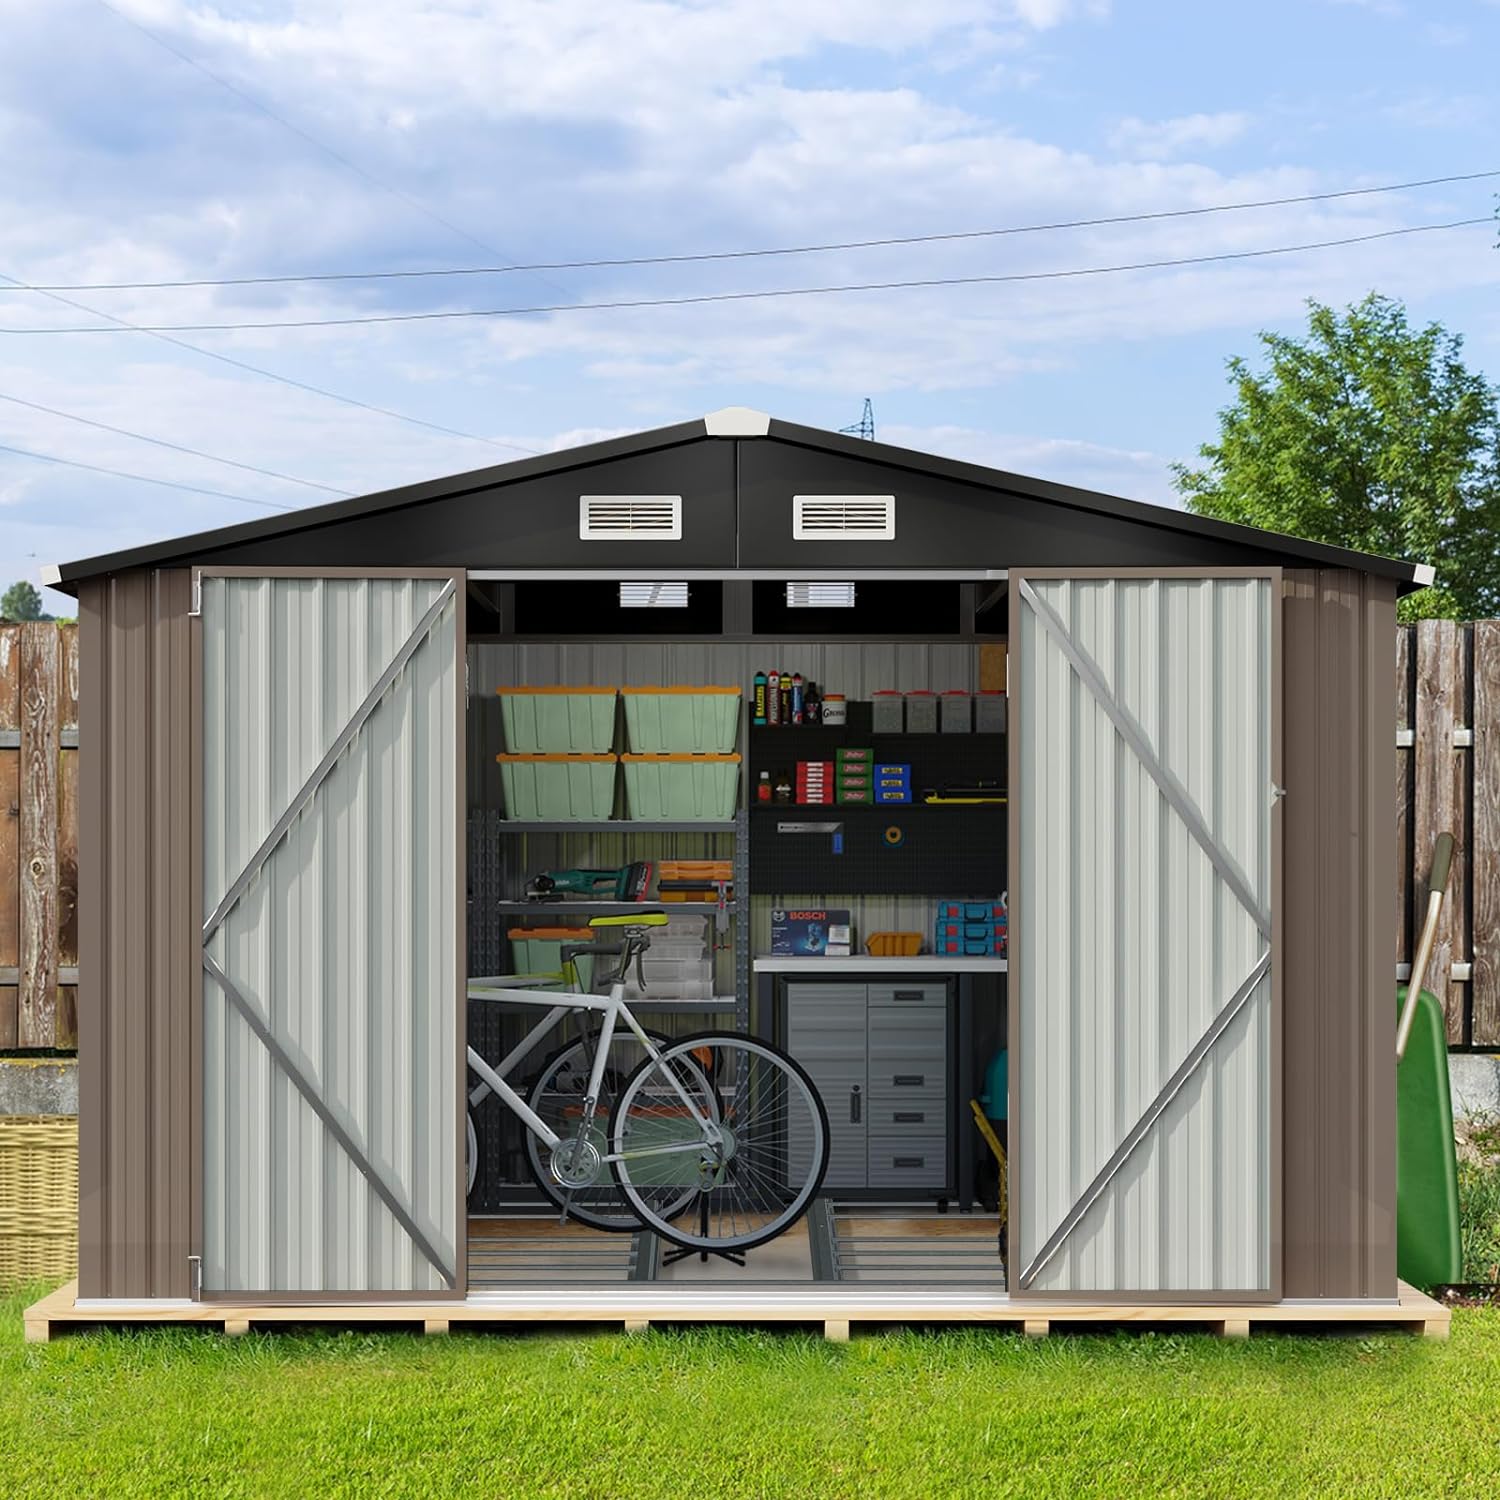 Utility Metal Shed with Base, Galvanized Steel Tool Storage Shed, with Air Vent and Lockable Door